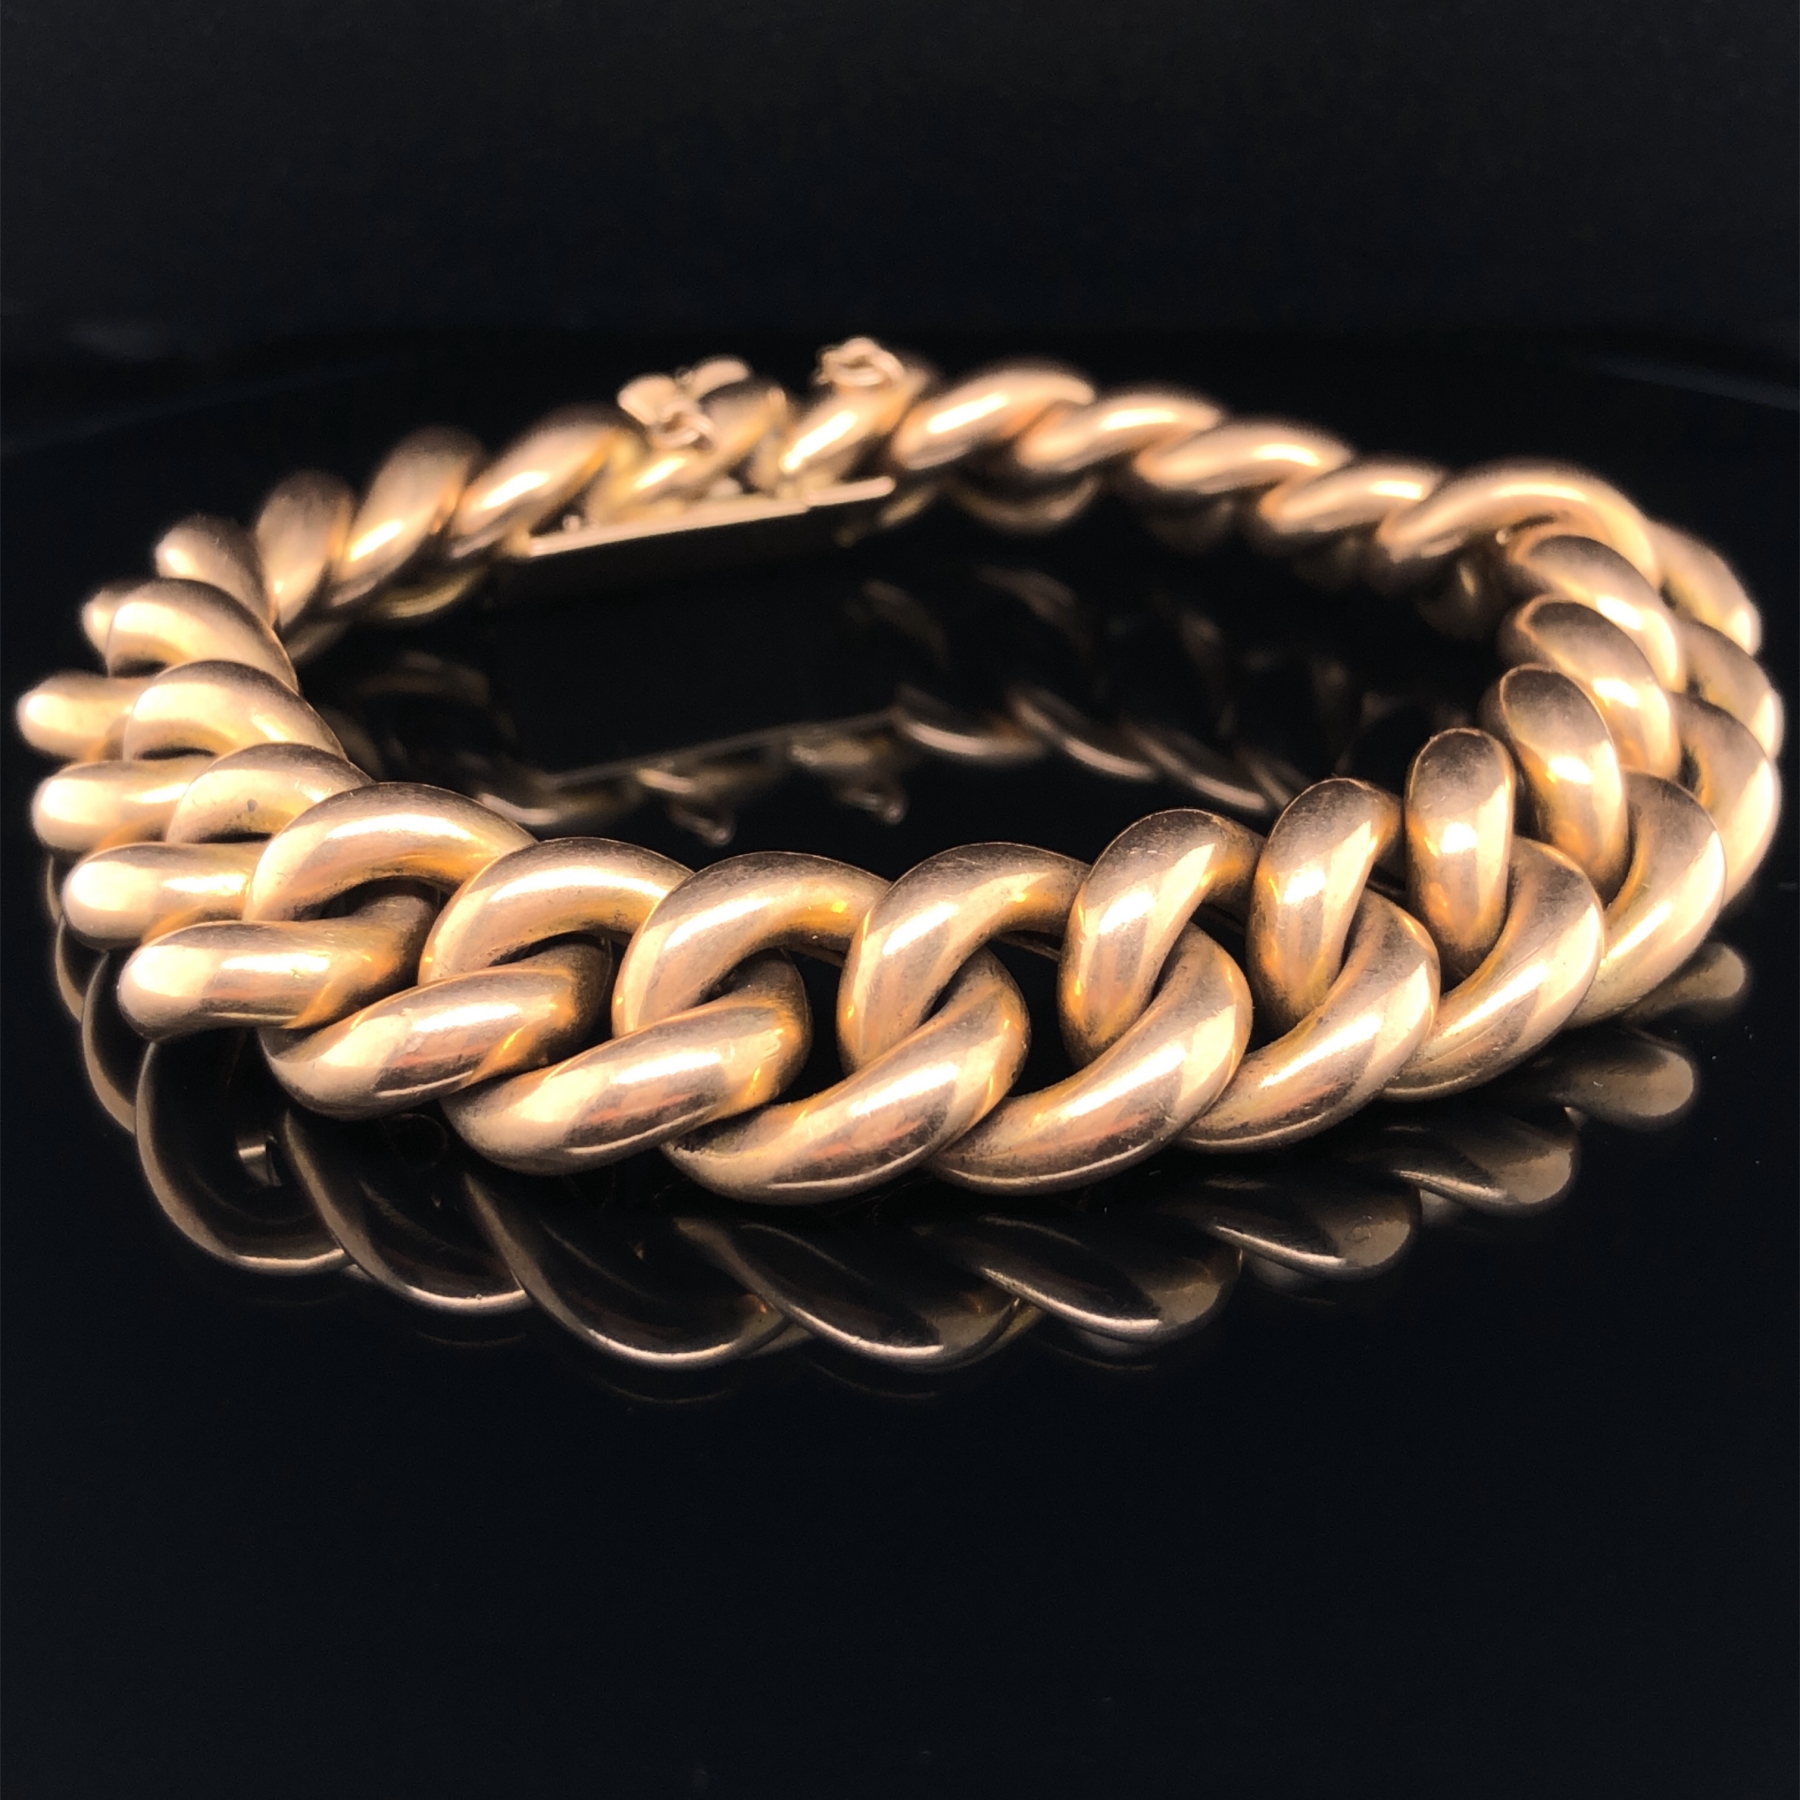 AN EDWARDIAN 15ct GOLD CURB BRACELET, COMPLETE WITH INTEGRAL CLASP AND SAFETY CHAIN. LENGTH APPROX - Image 3 of 5